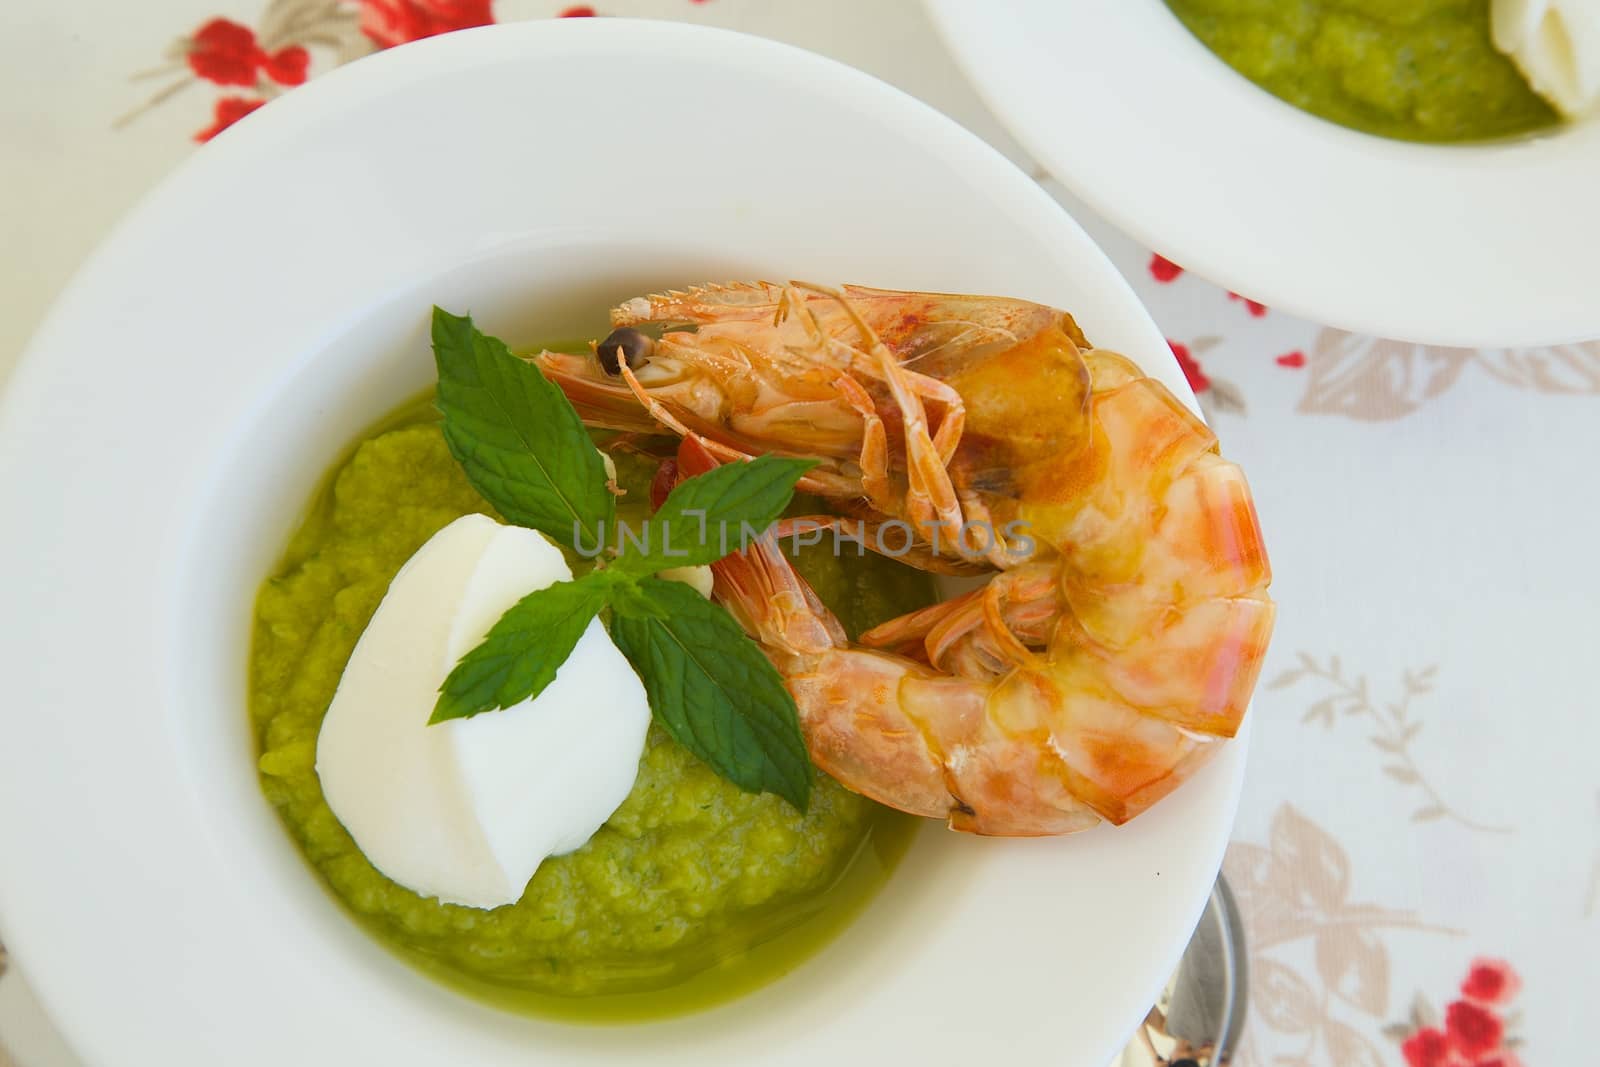 Healthy lunch soup-zucchini cappuccino soup with shrimps by tolikoff_photography